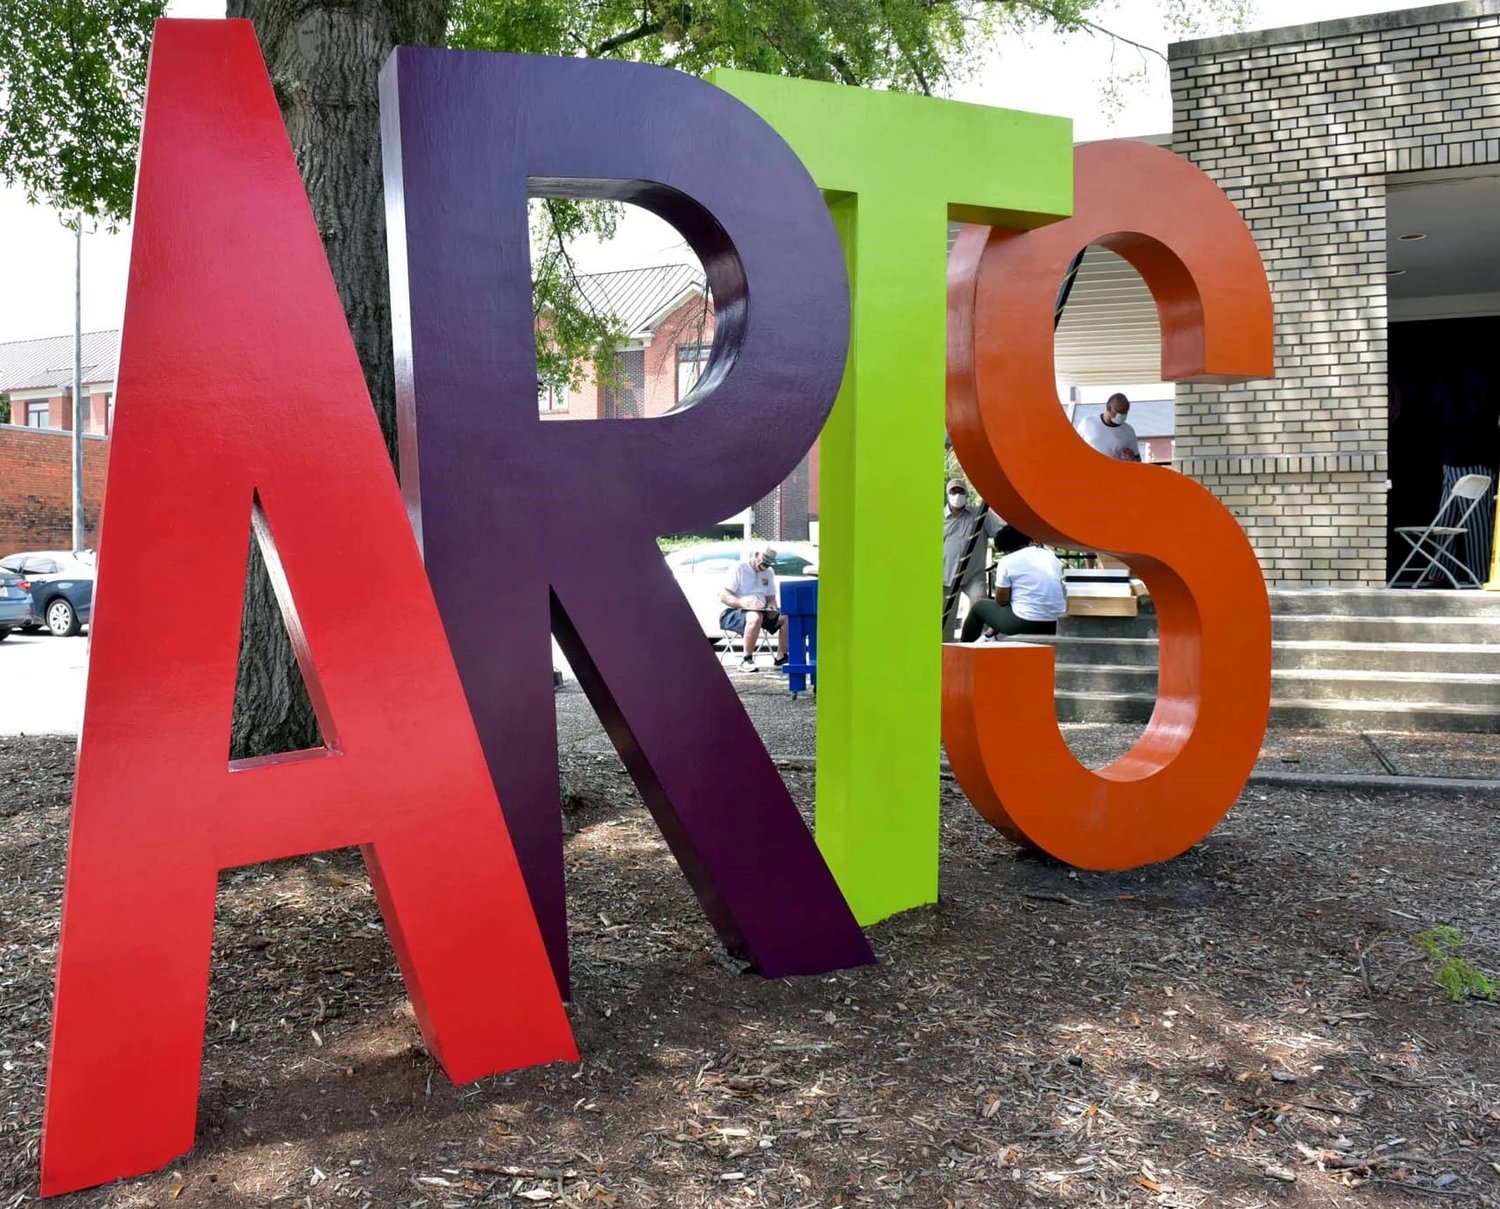 The Arts Council of Fayetteville-Cumberland County has announced arts grants for the second quarter of 2022.